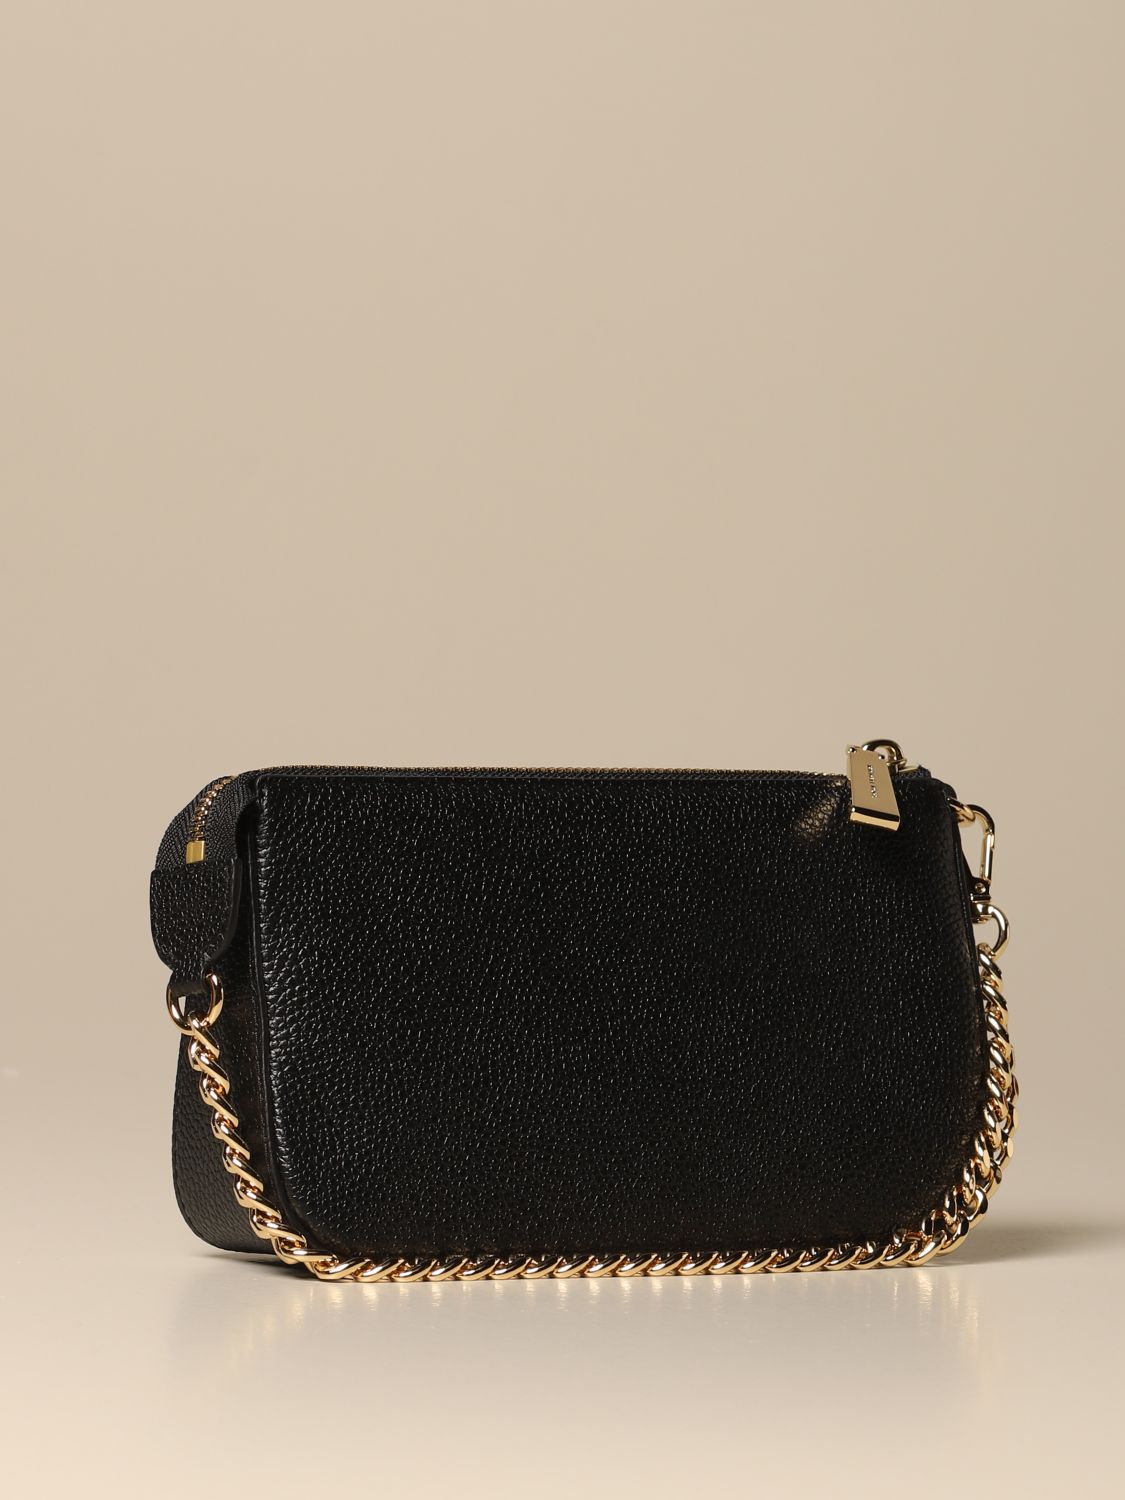 MICHAEL KORS: Michael chain clutch in grained leather - Black | Michael ...